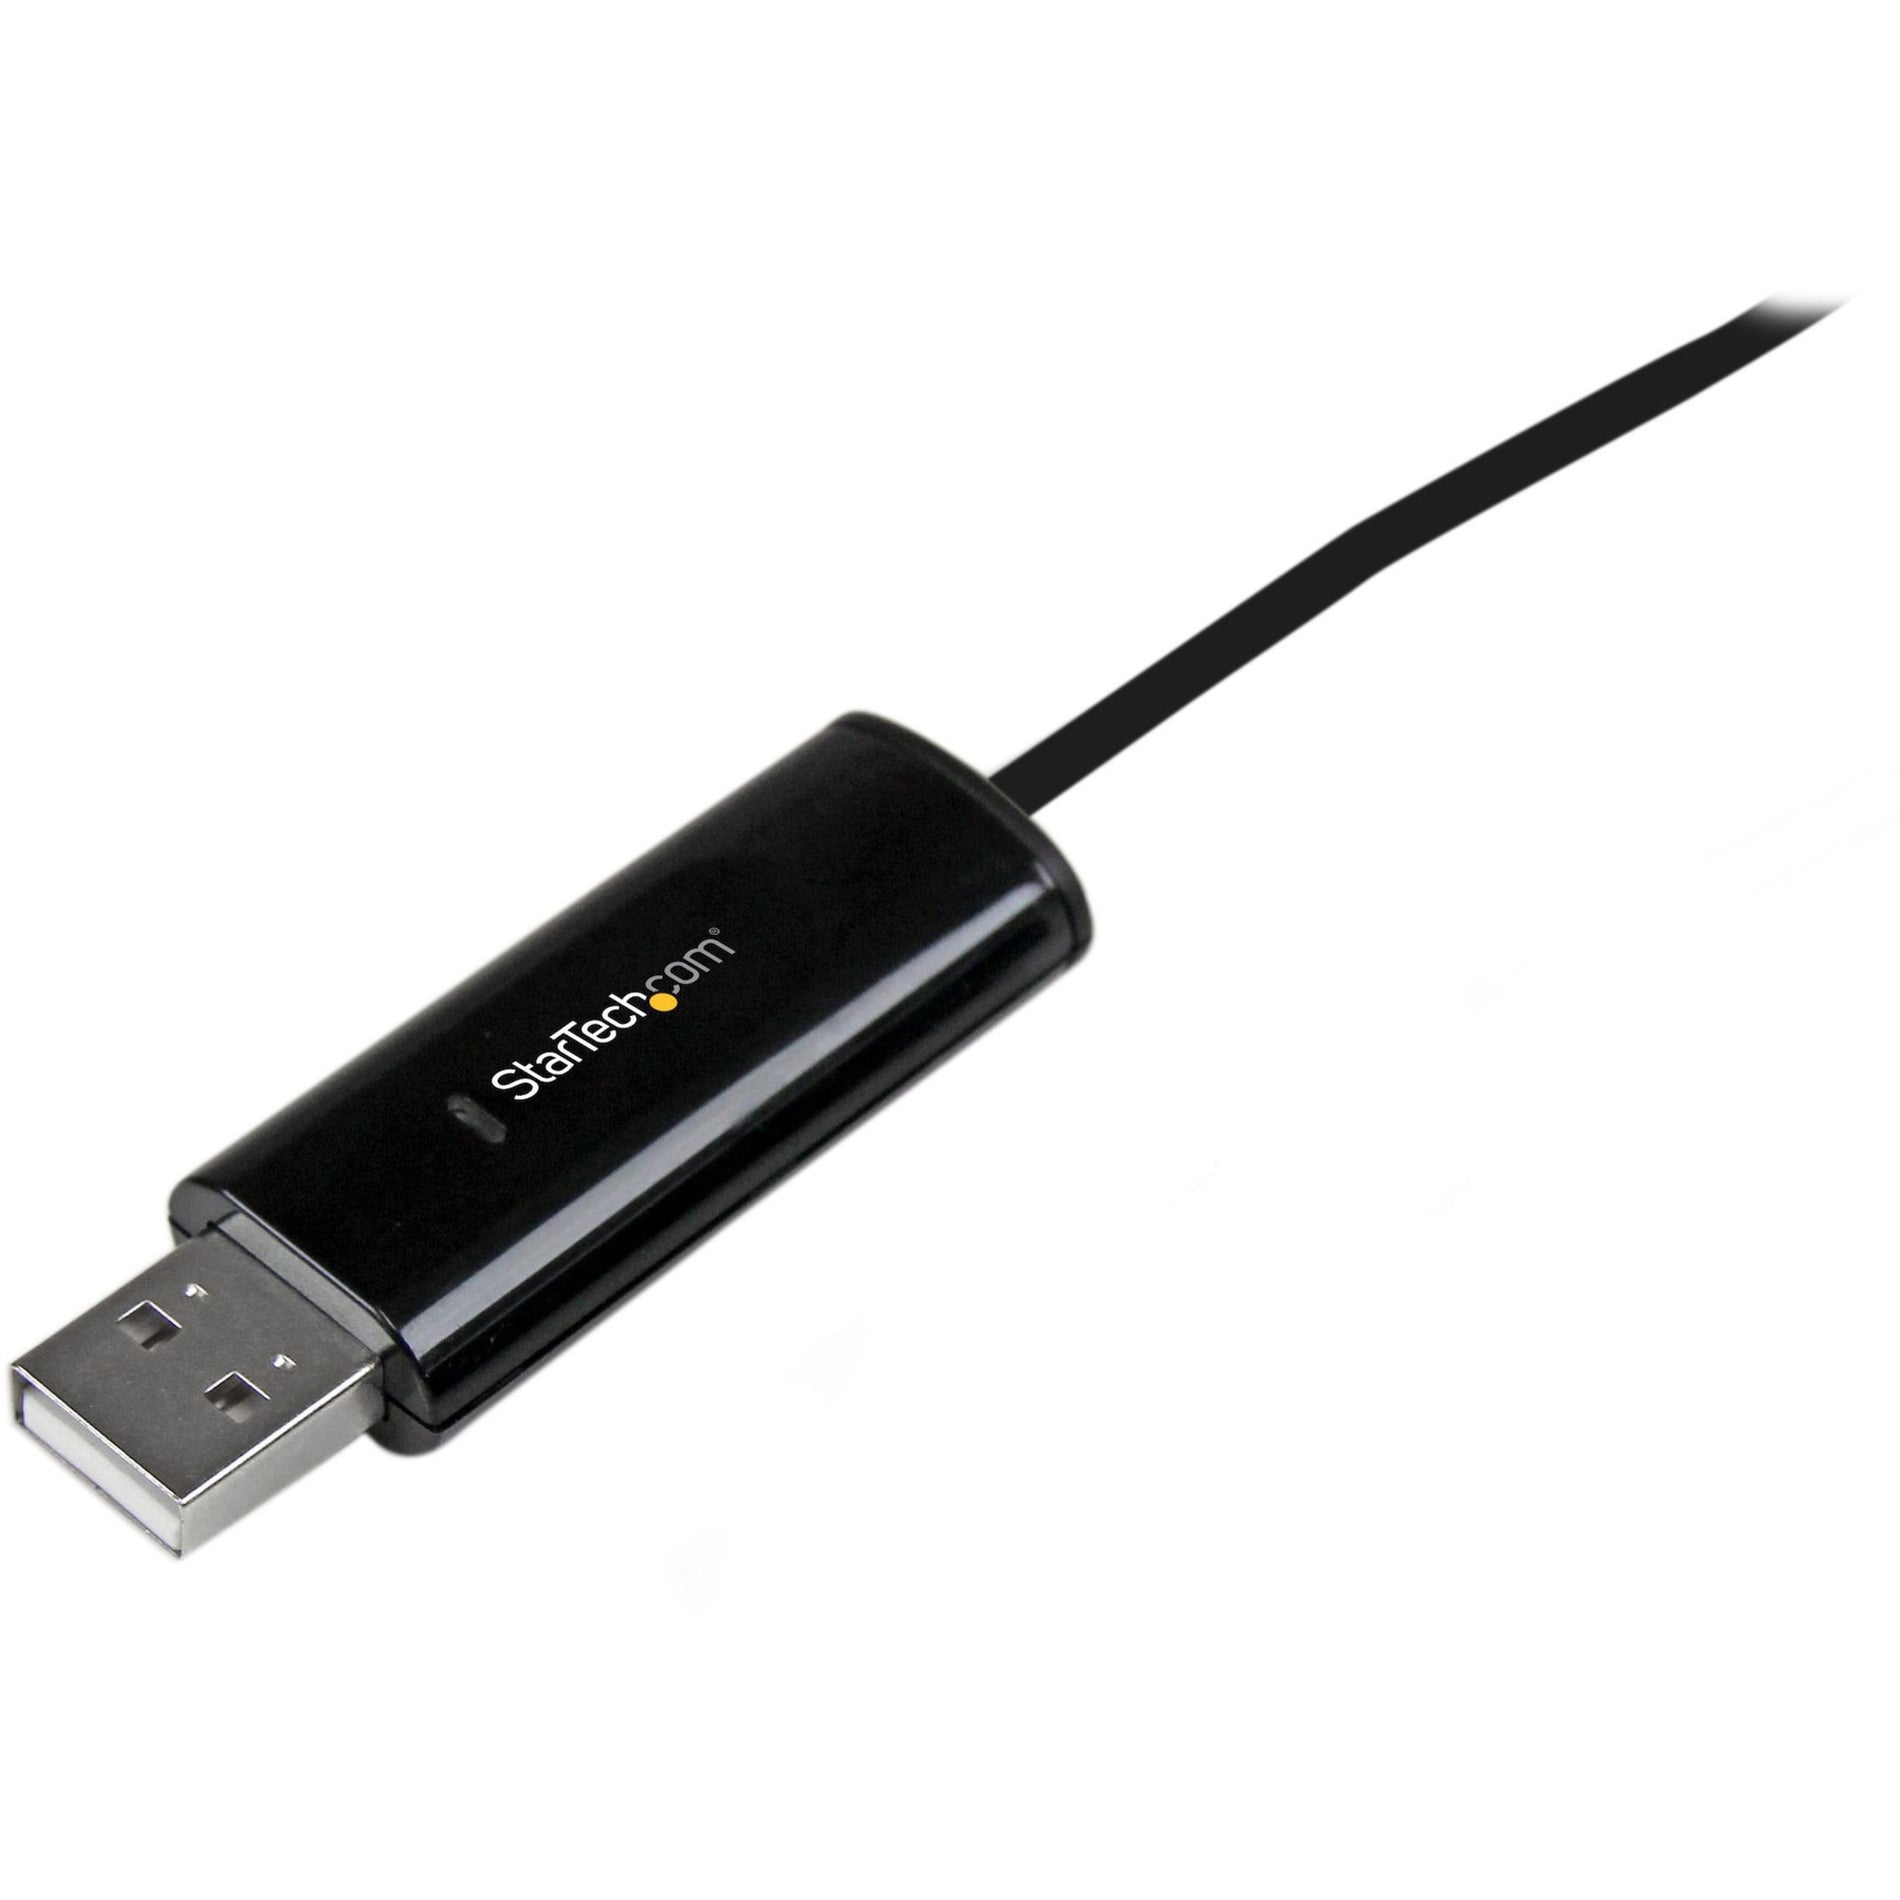 StarTech.com SVKMS2 2 Port USB KM Switch Cable w/ File Transfer for PC and Mac, Easy Keyboard and Mouse Control